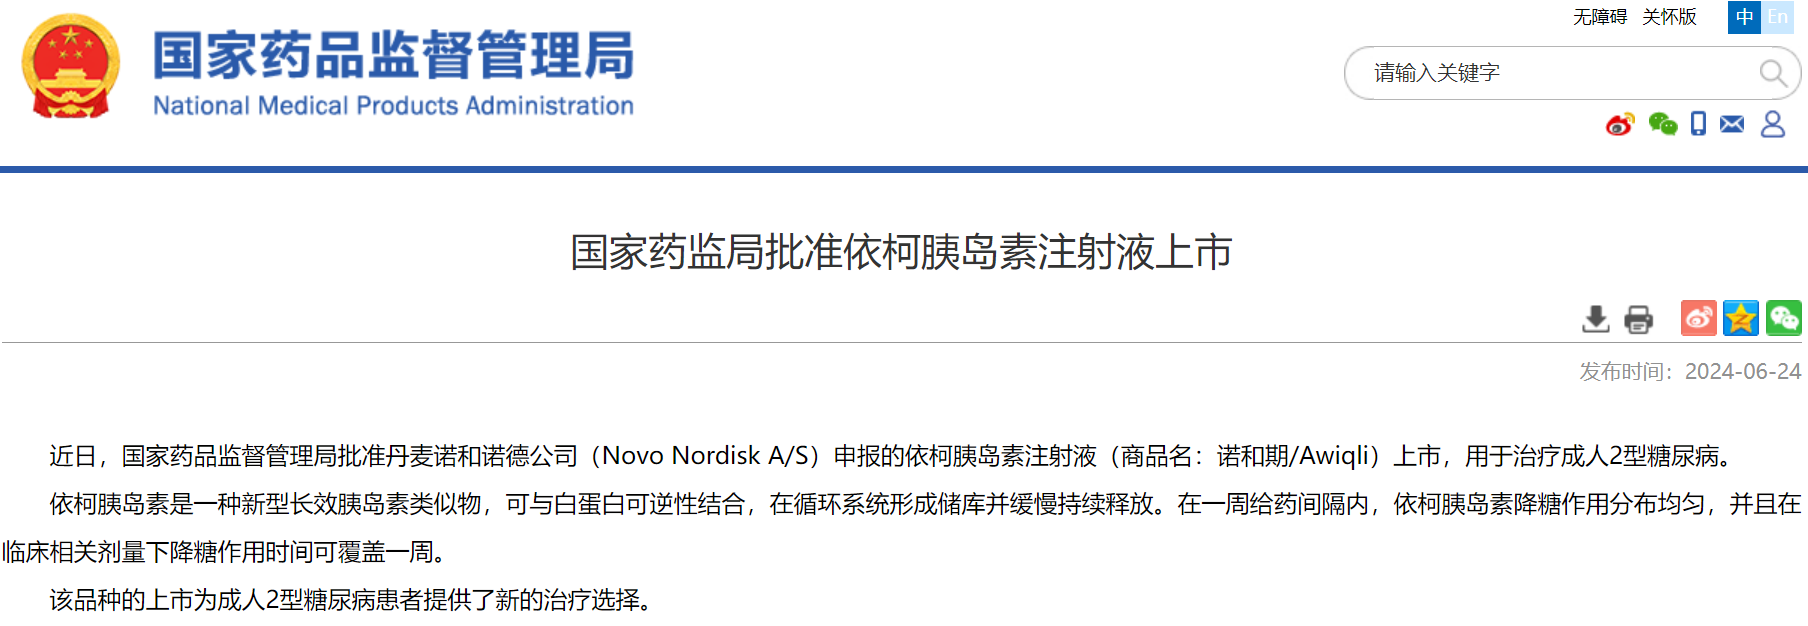 【Breaking News！】Once a Week! Novo Nordisk's Ultra-Long-Acting Insulin Approved in China for the Treatment of Diabetes